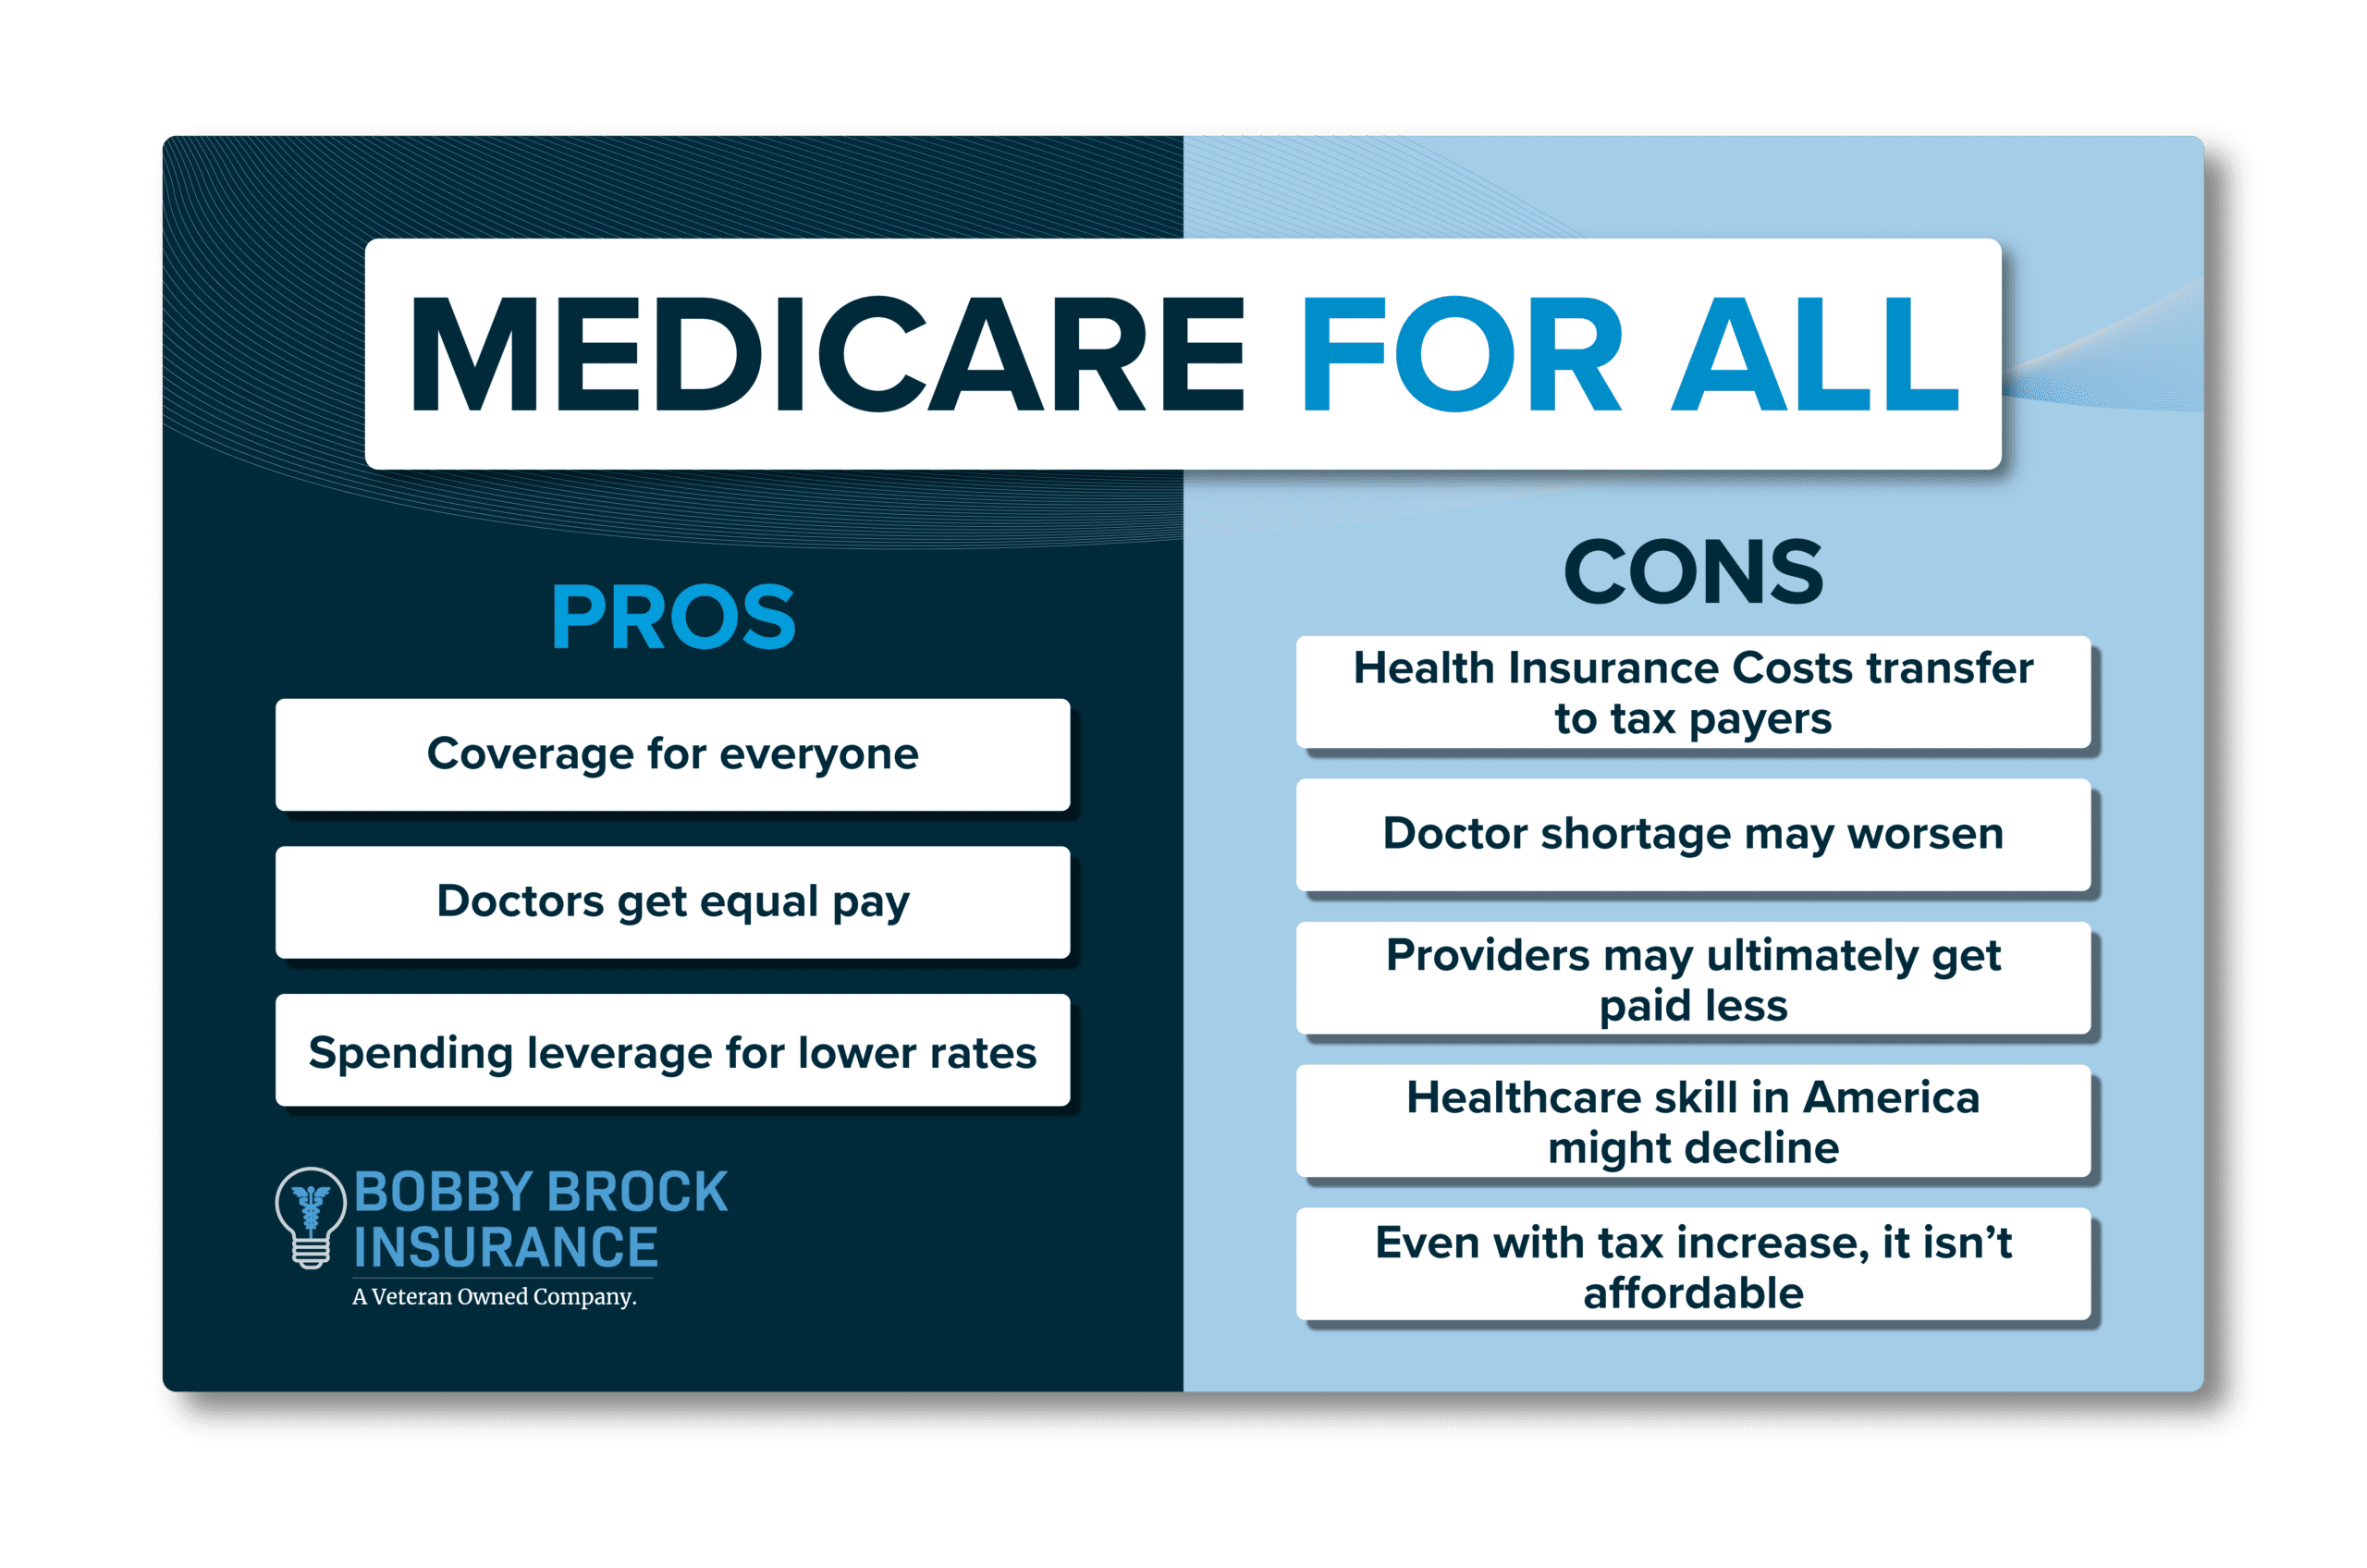 Medicare For All | Pros and Cons